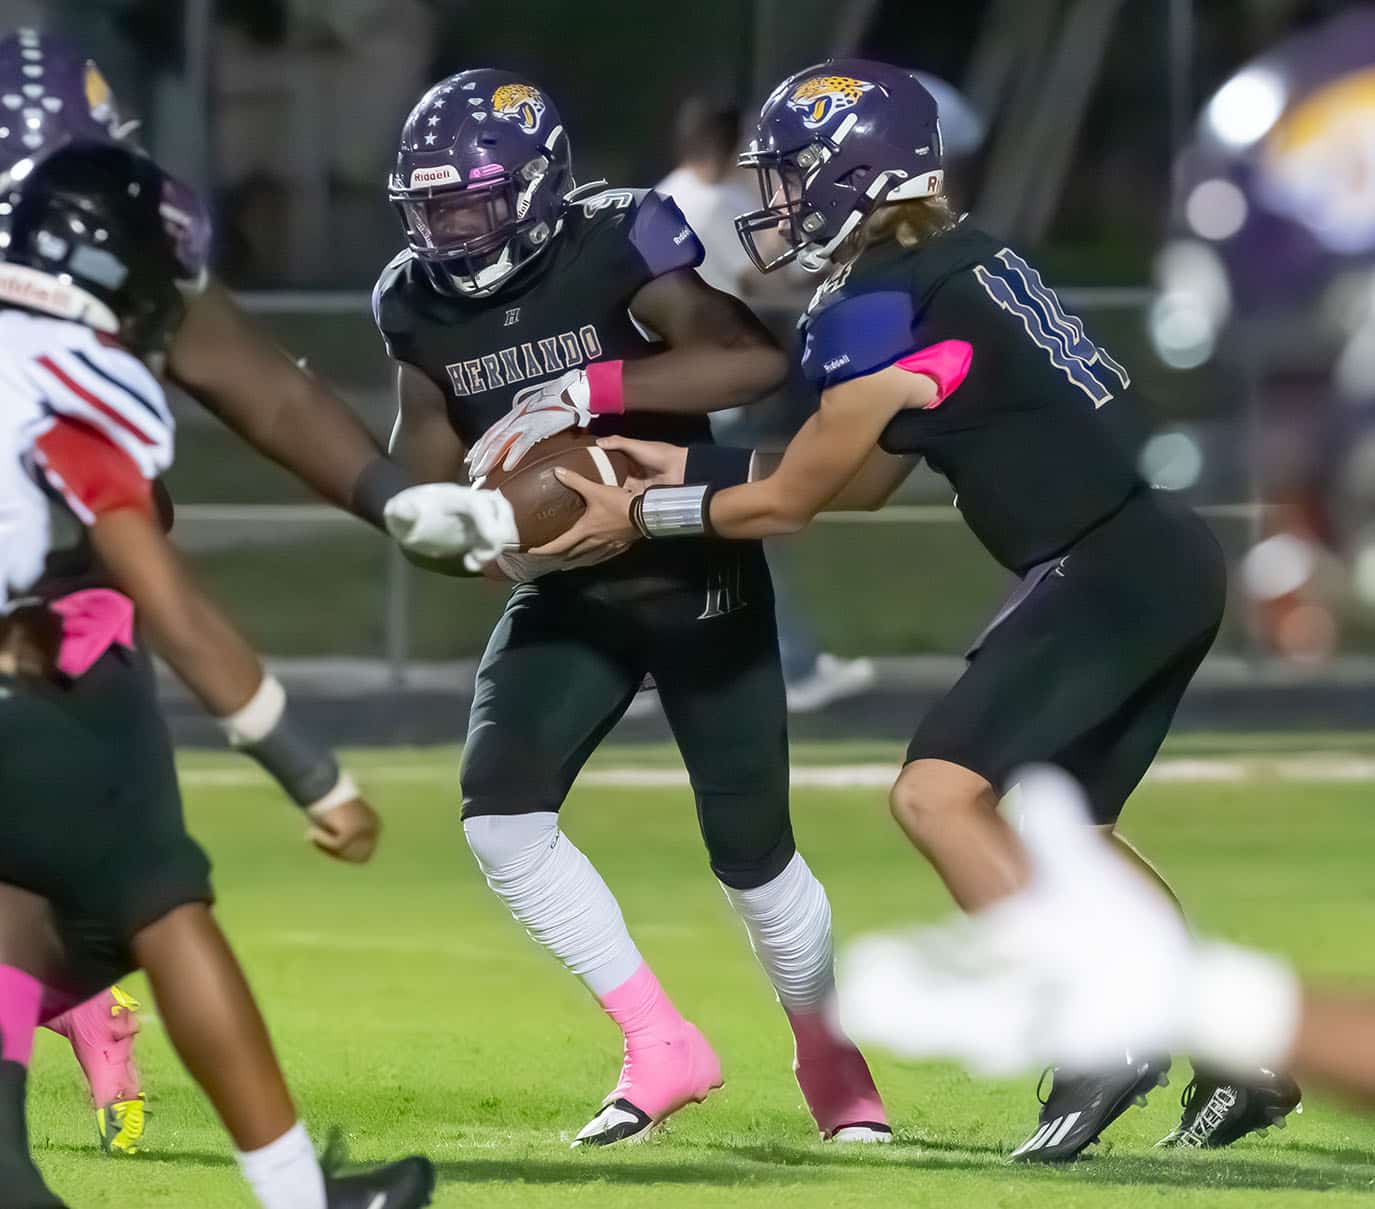 Hernando High QB, Michael Saltsman hands off to John Capel III during the game versus visiting South Sumter on 10/13/23. Photo by Joe DiCristofalo